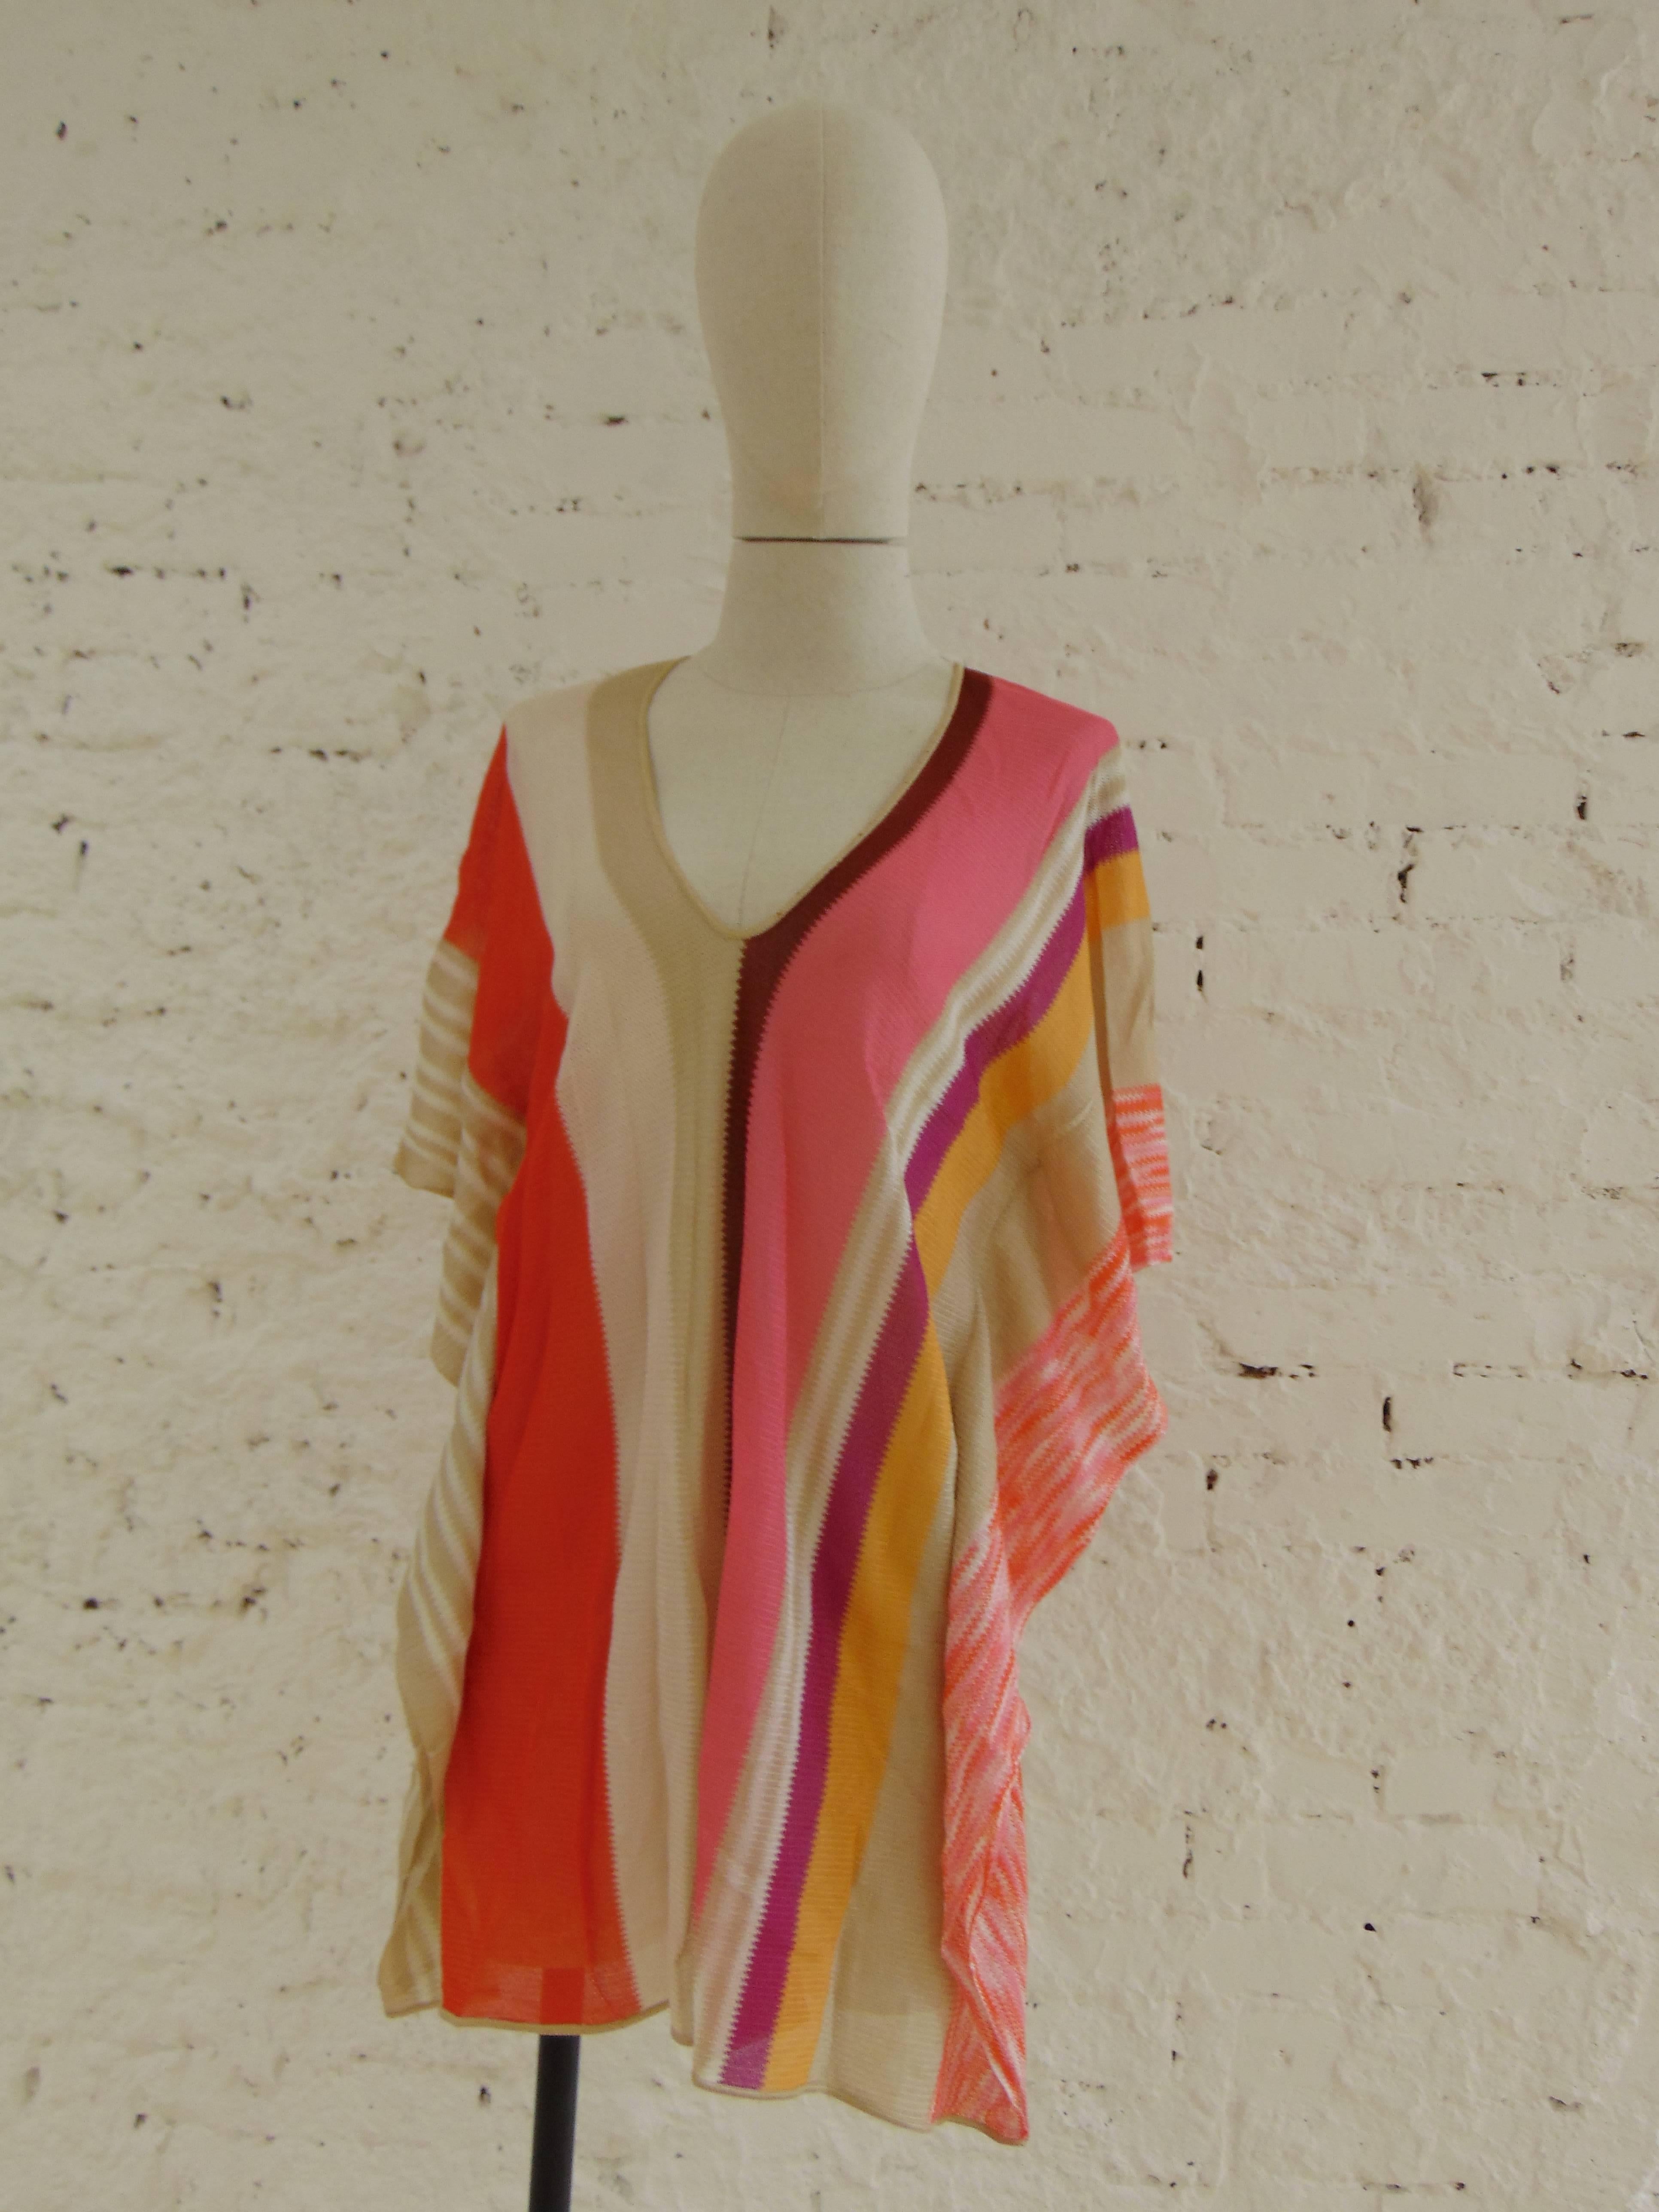 Missoni mare cotton dress
totally madei n italy
in size 42